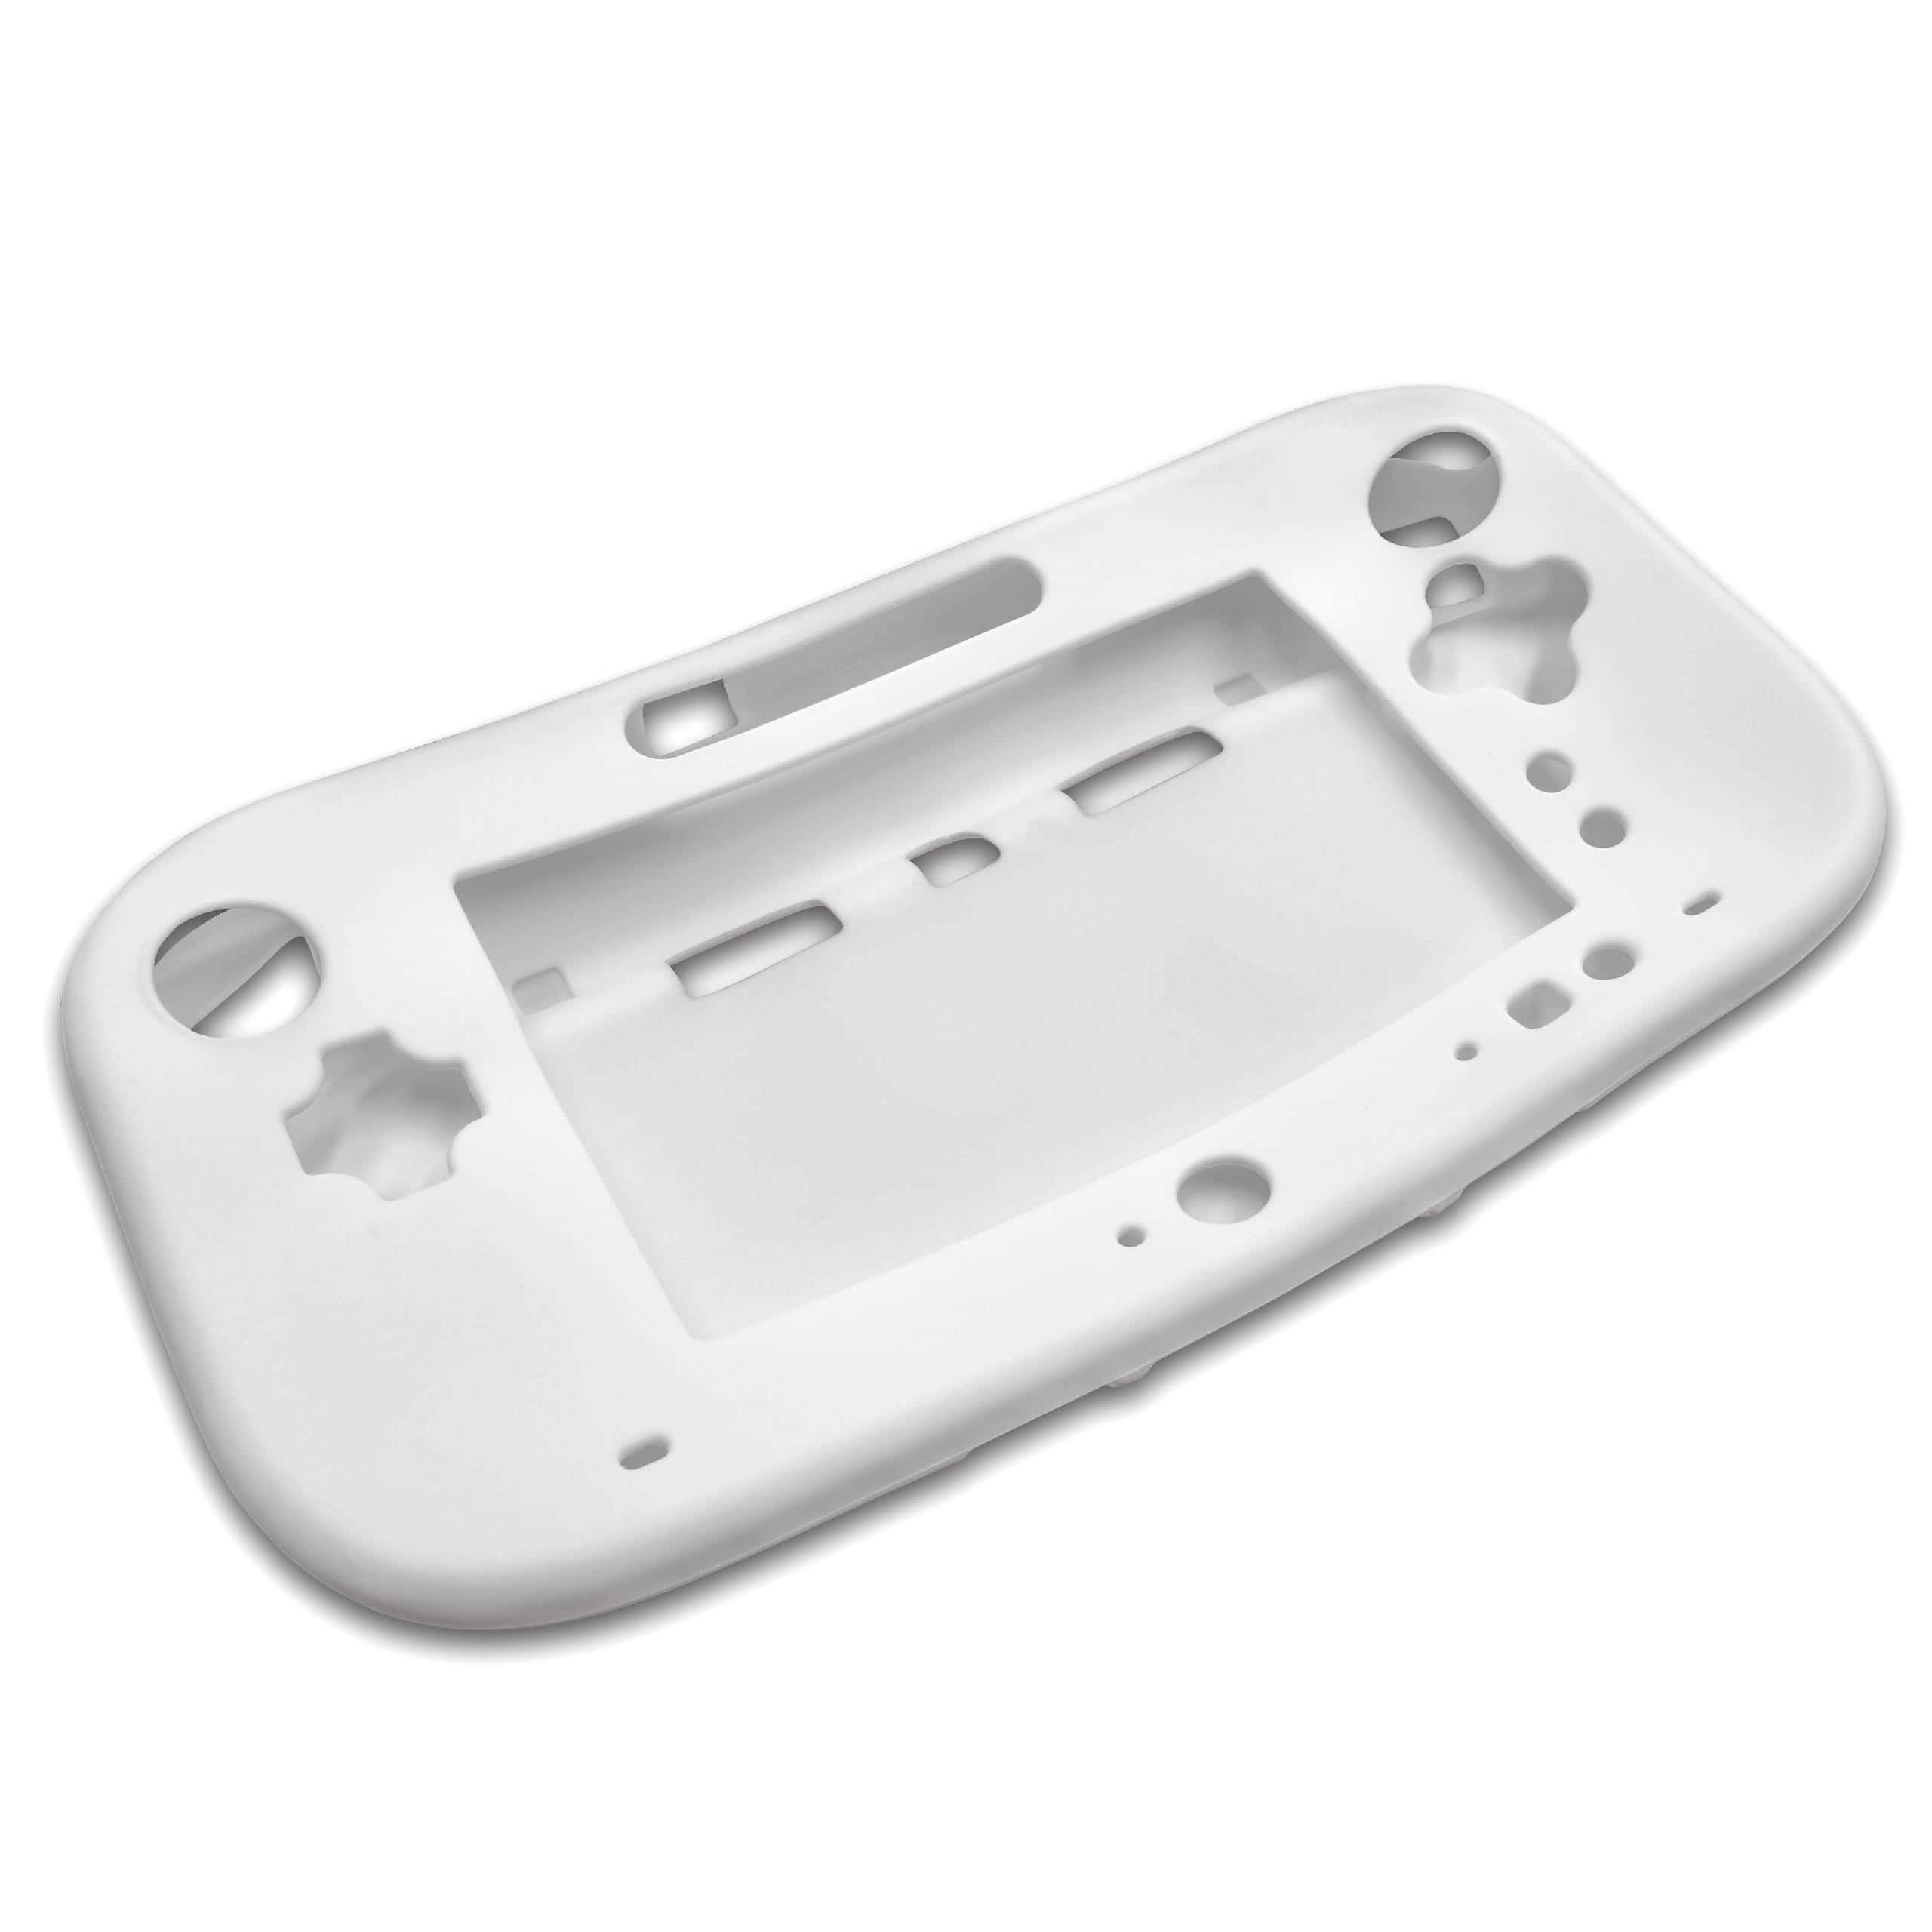 Cover suitable for Nintendo Wii U Gamepad Gaming Console - Case, Silicone, White